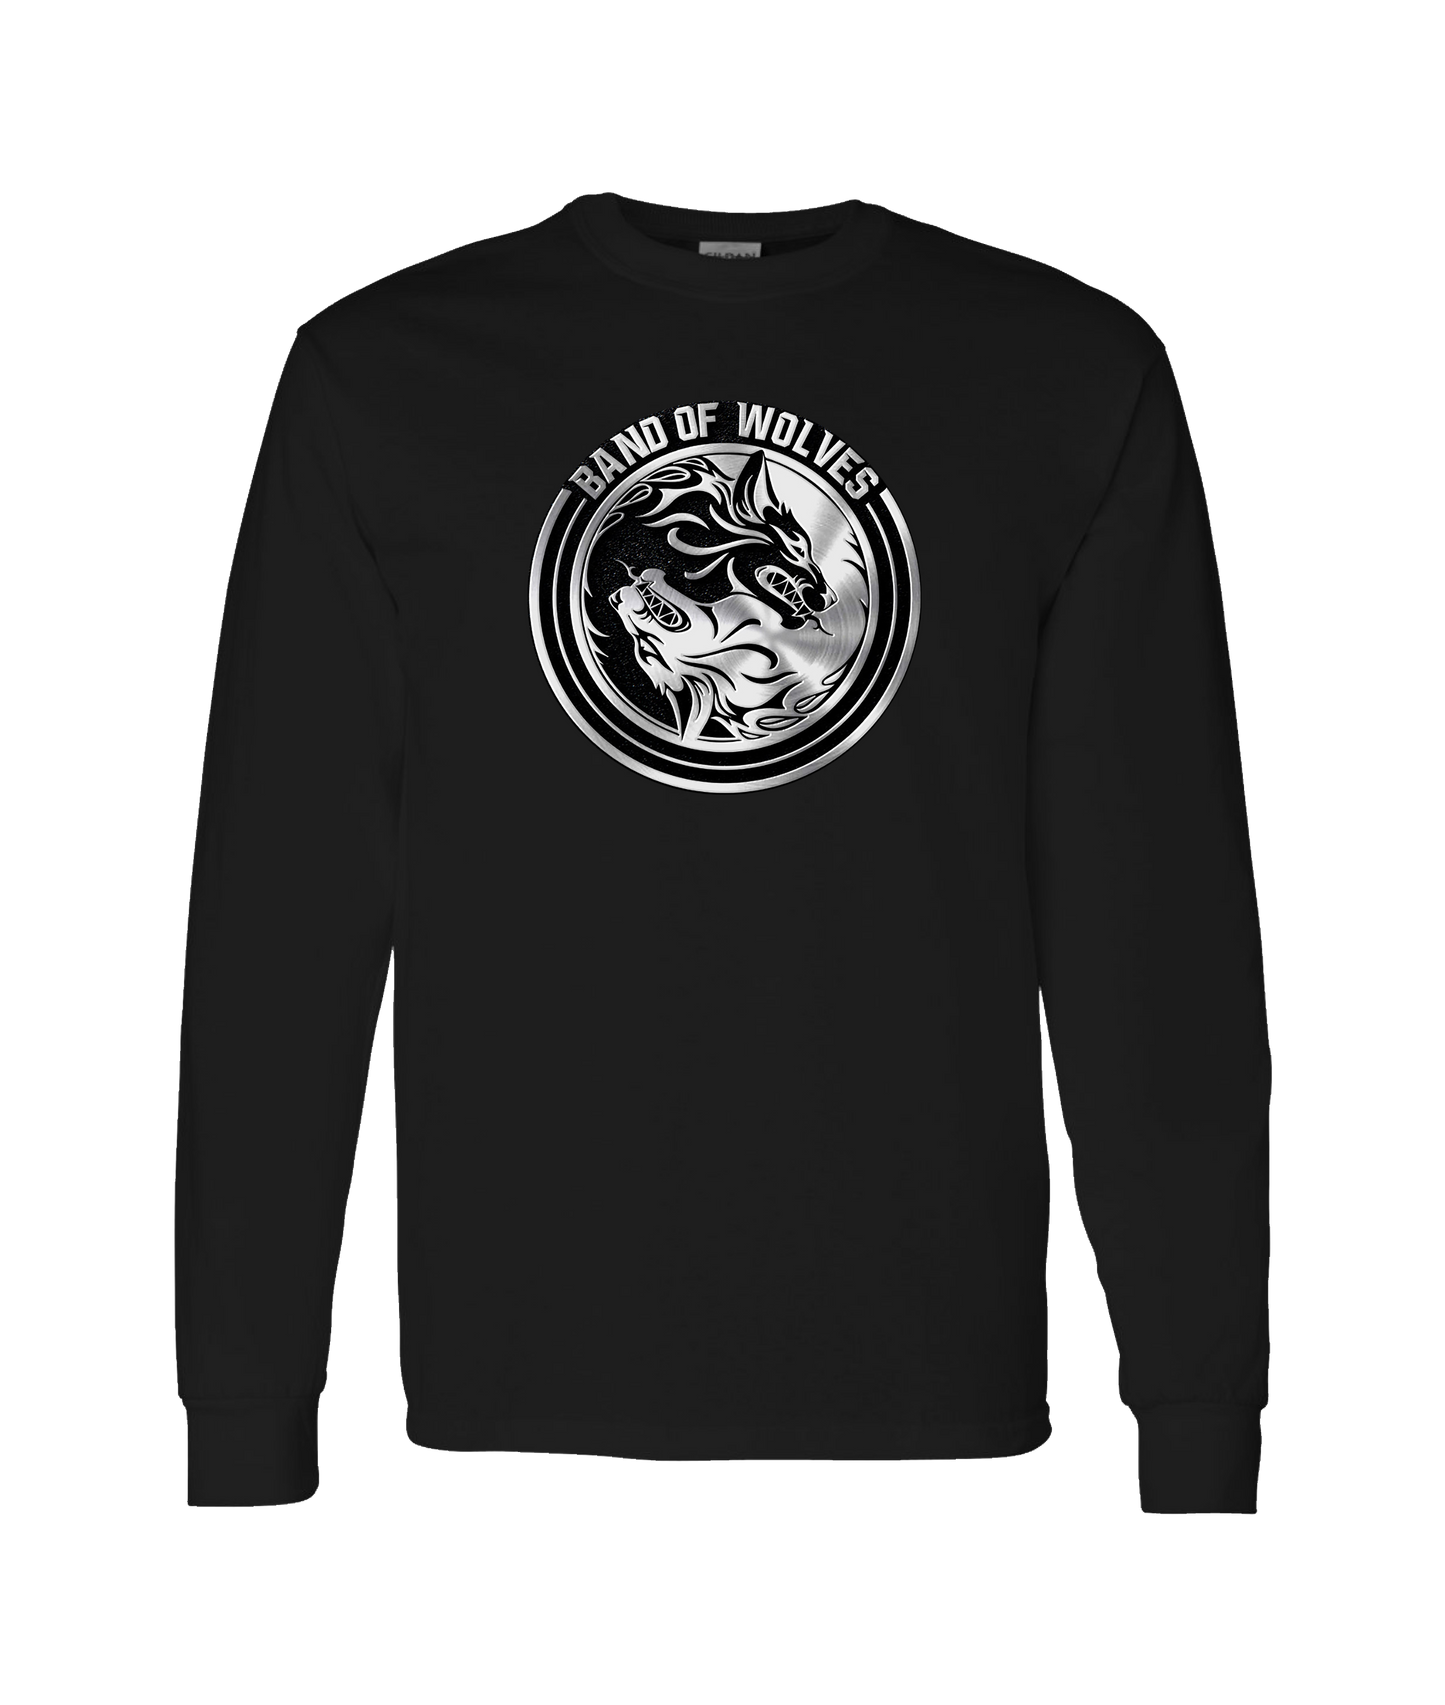 Band of Wolves - The Wolf - Black Long Sleeve T